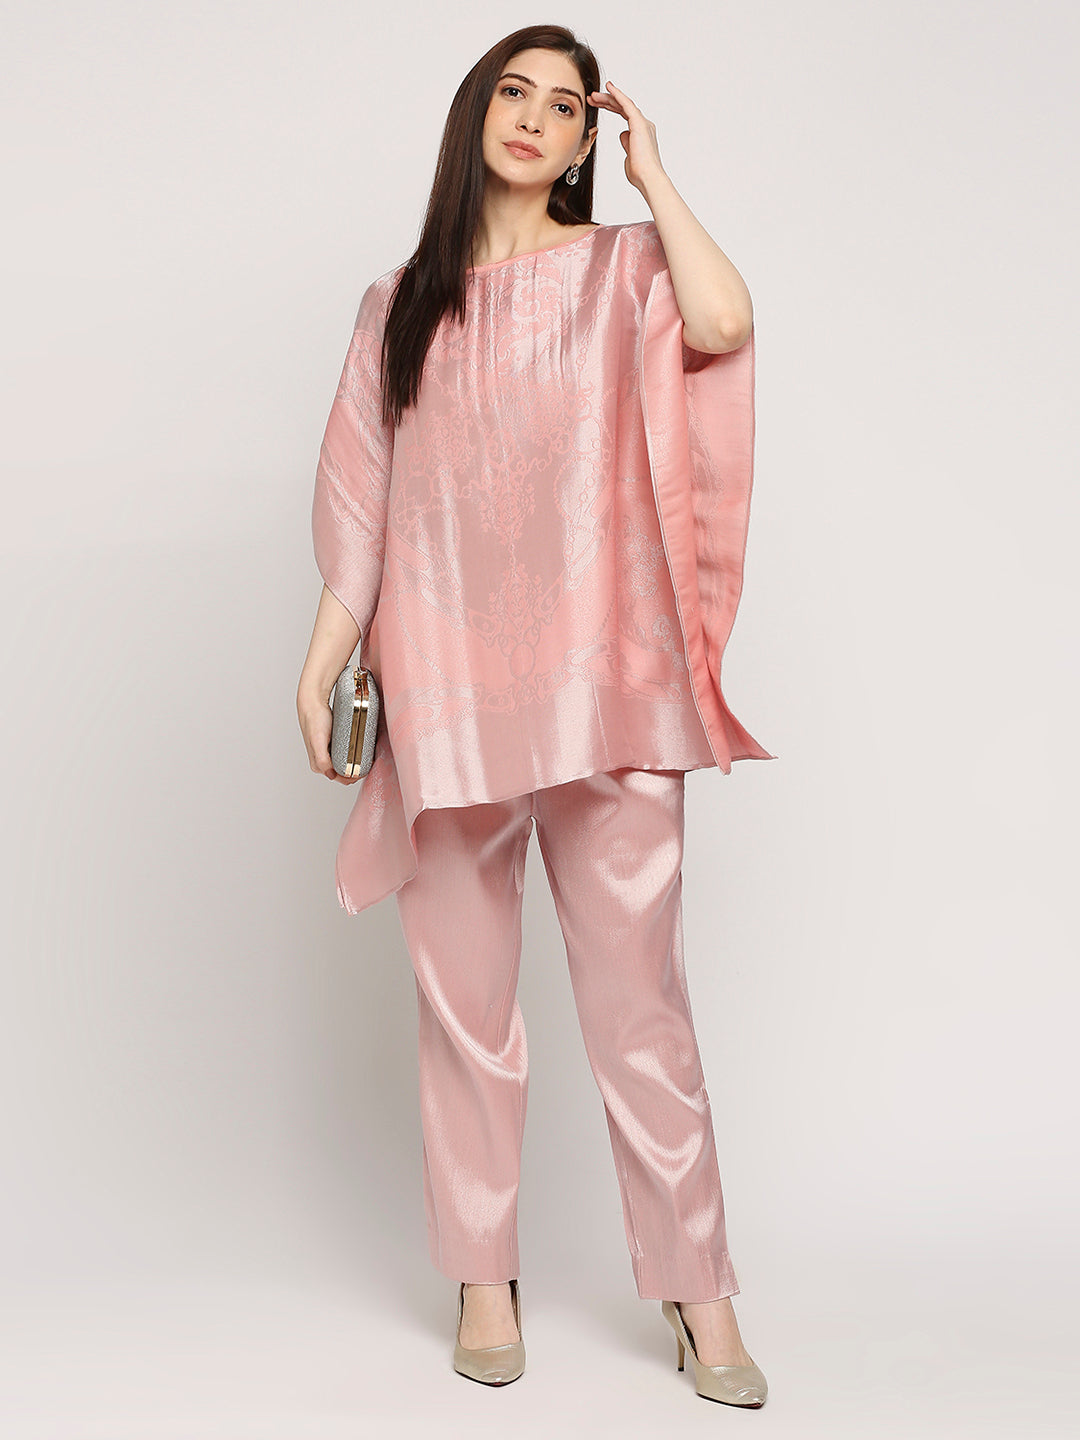 French Patterned Peach Brocade Co-Ord Set